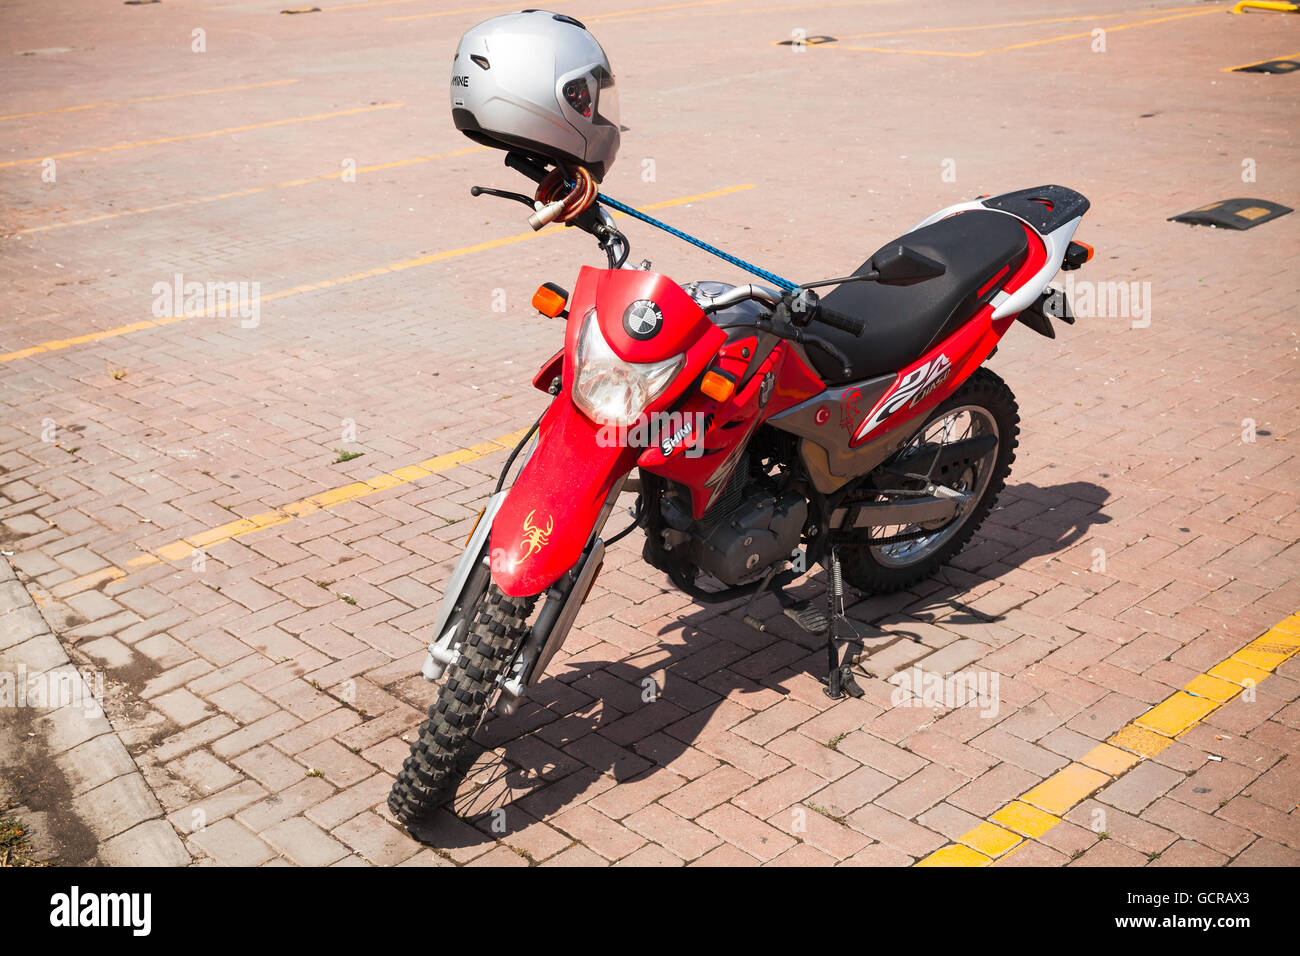 Istanbul, Turkey - June 30, 2016: Red SY150GY 150cc sport motorcycle stands on a parking lot Stock Photo